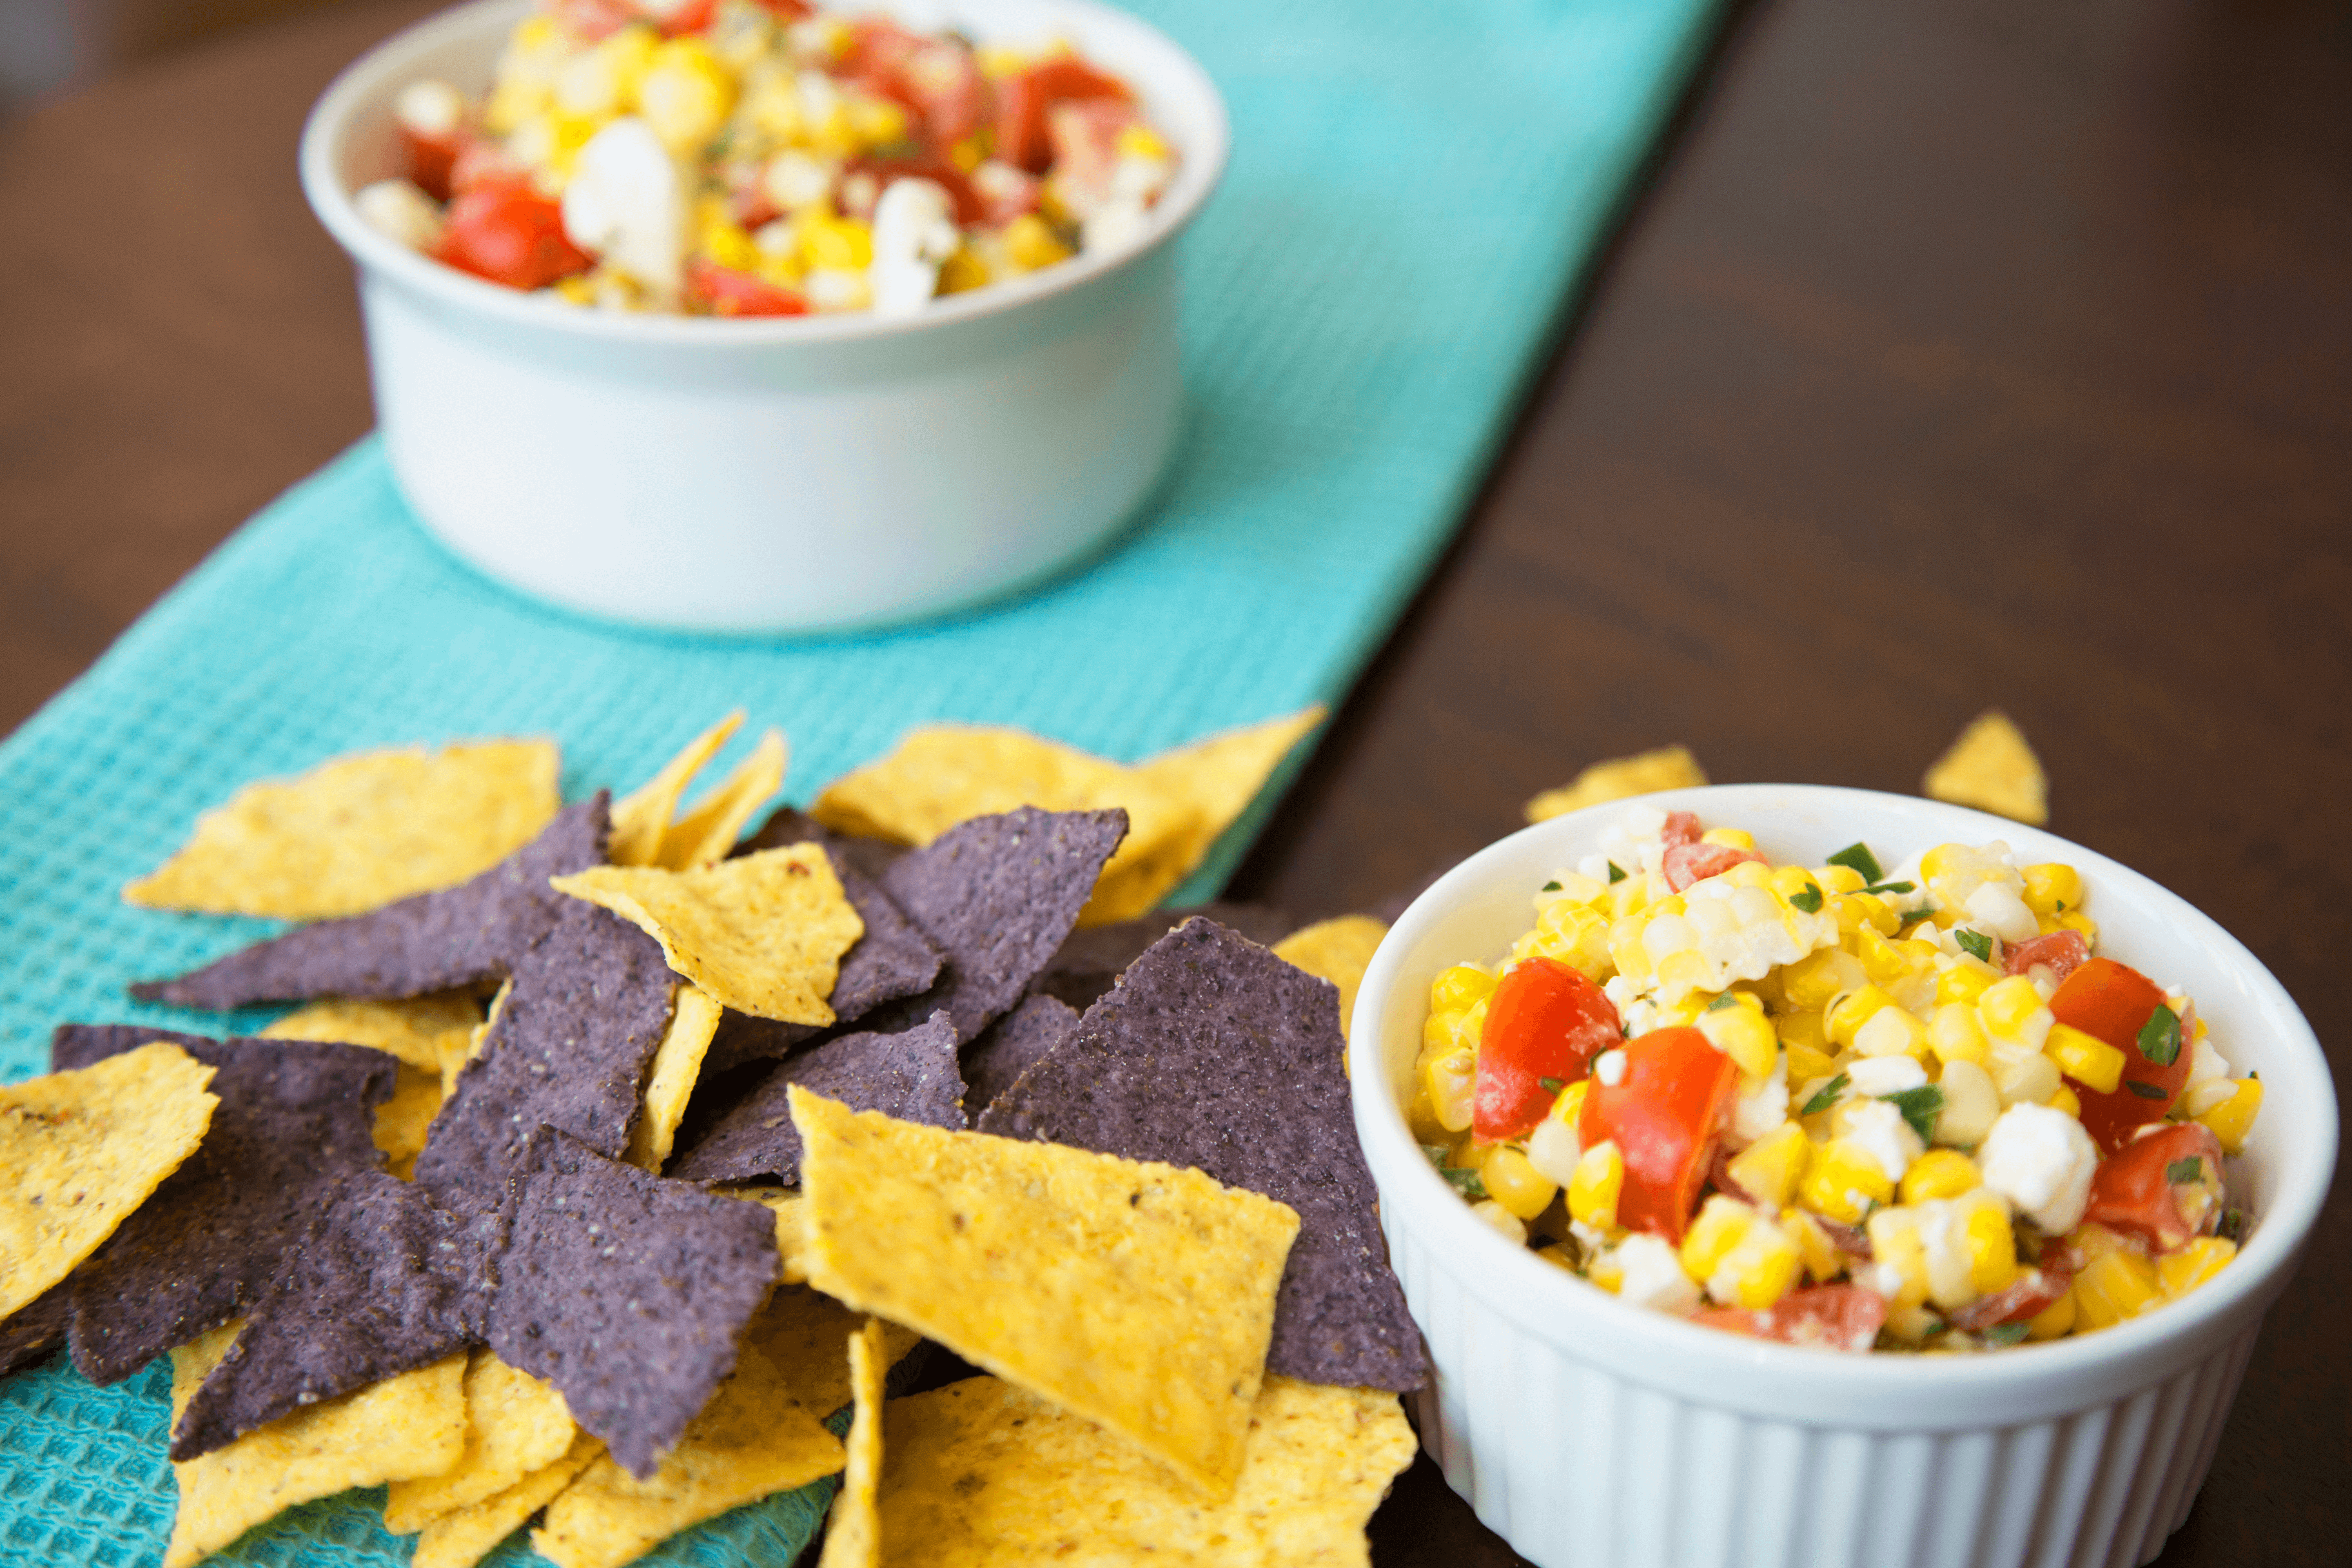 Versatile recipes like a simple summer corn salad are great because they can be a dip or a side.